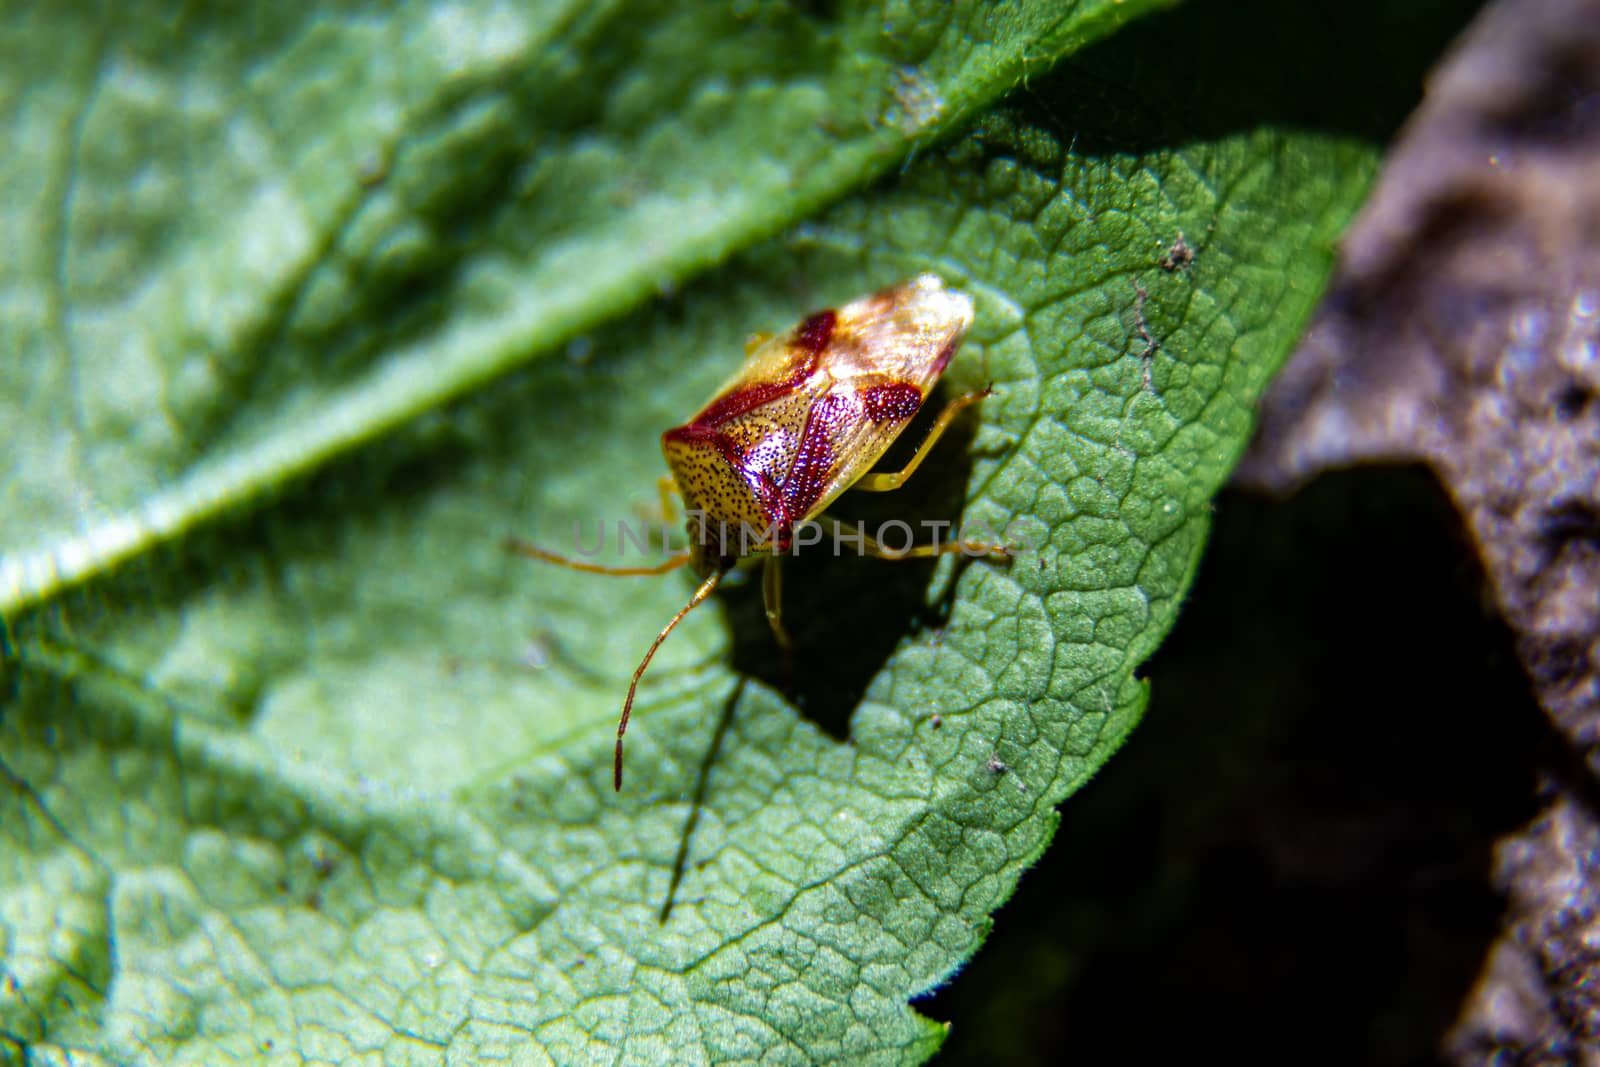 A close-up of a red cross shield bug on a green leaf.